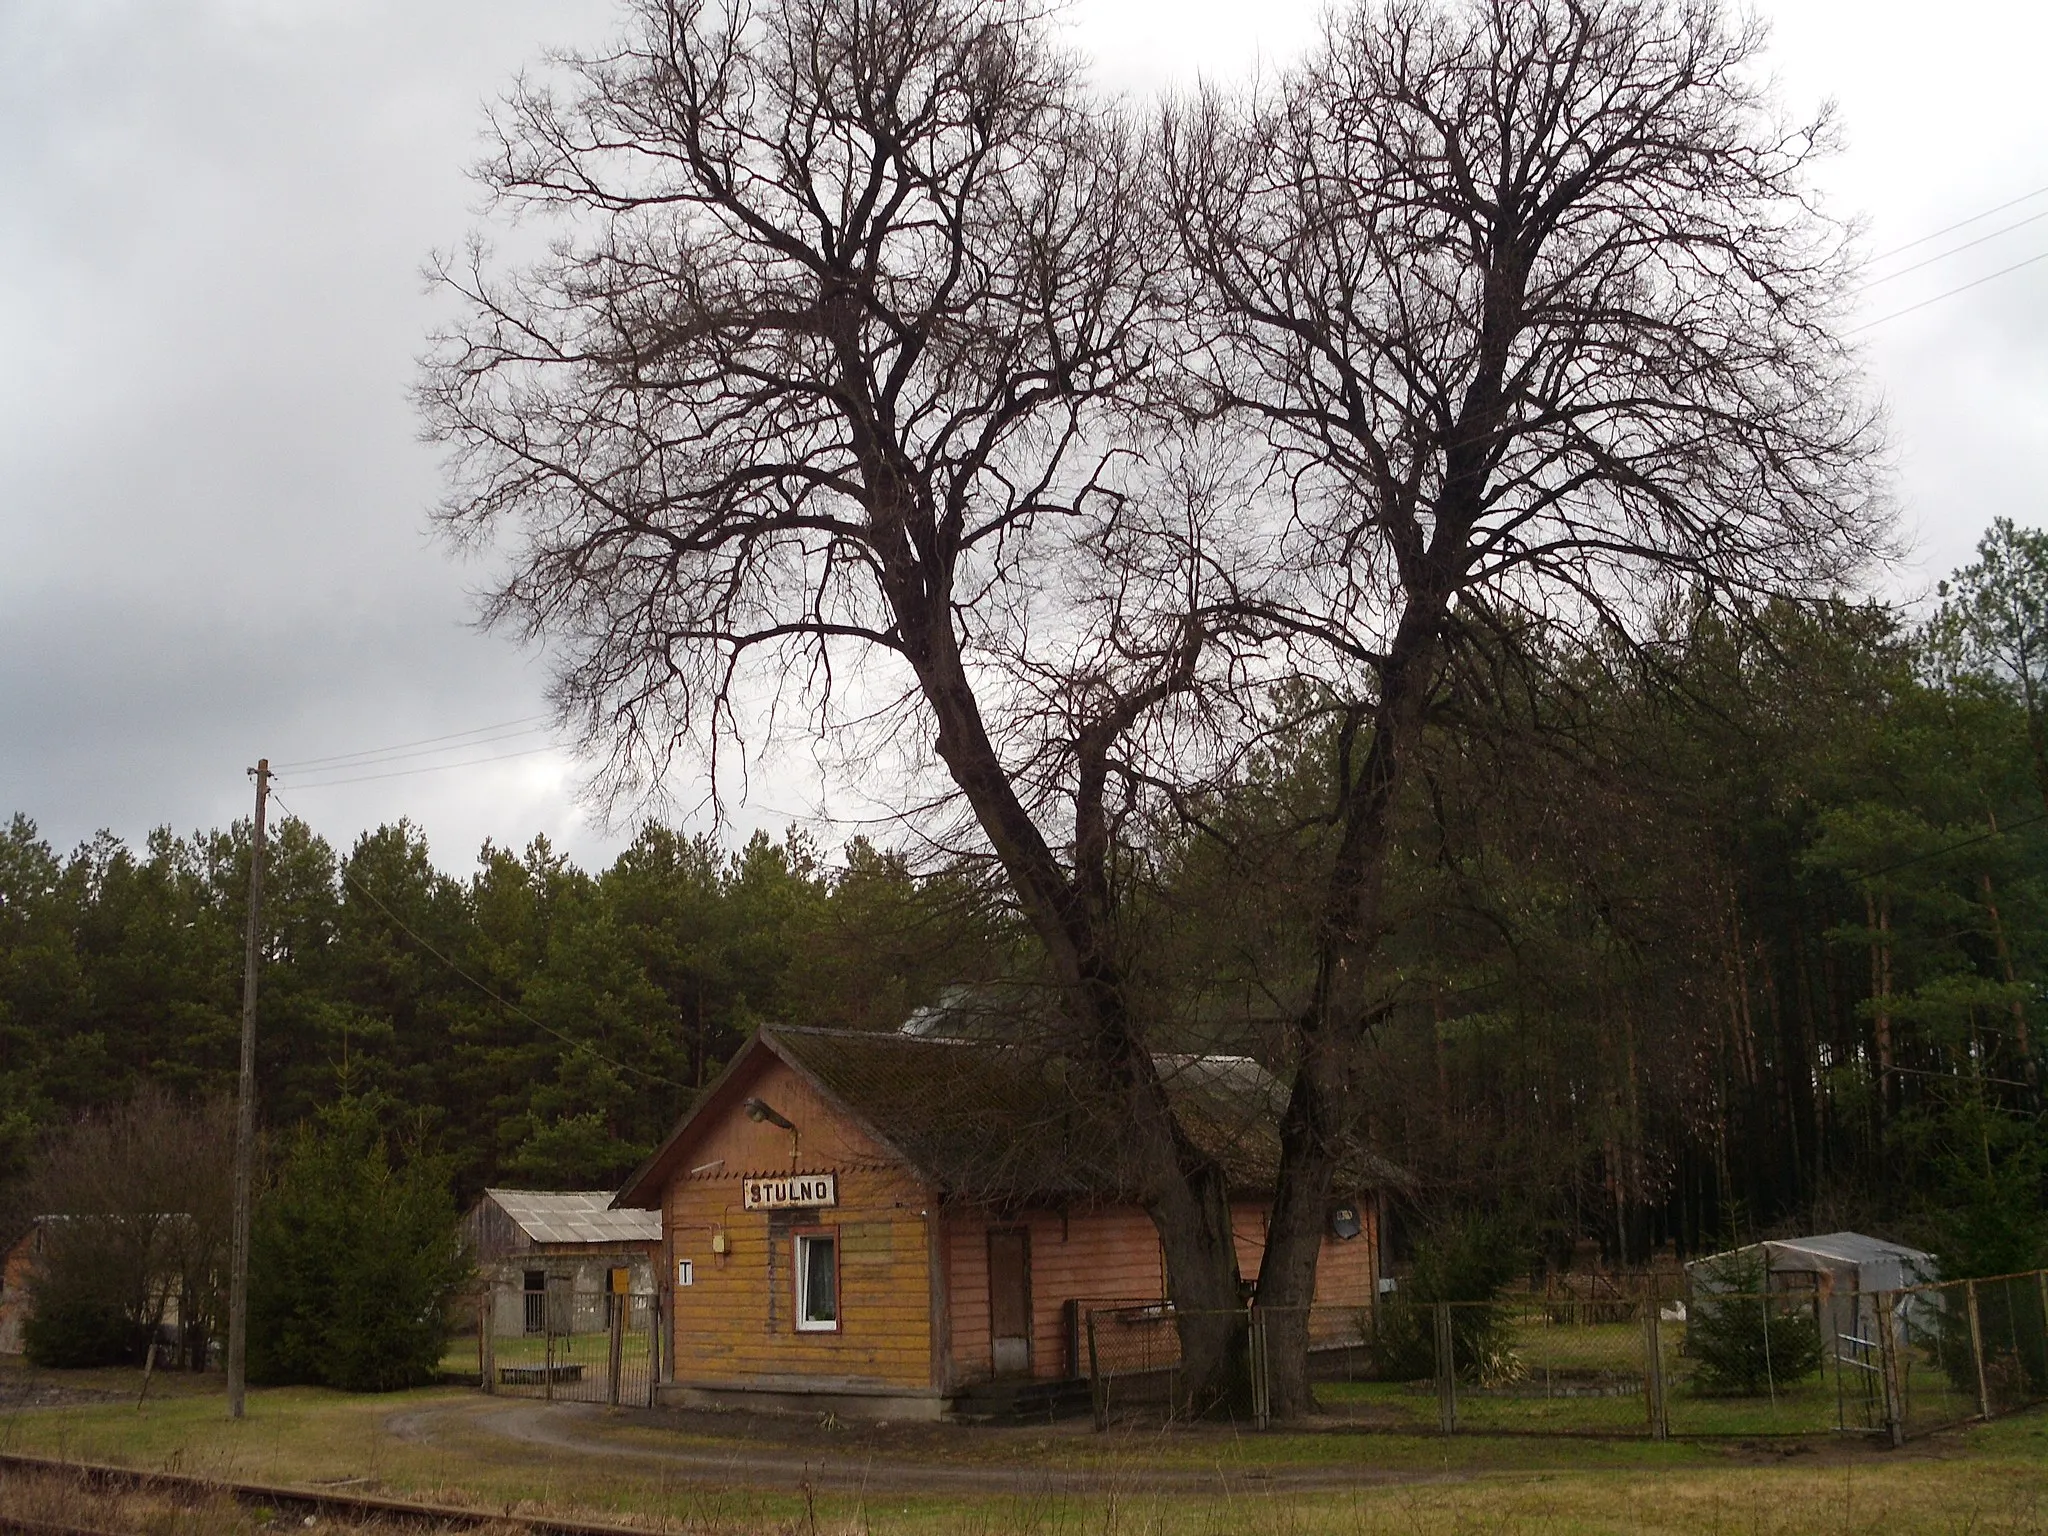 Photo showing: Building of a former train stop in Stulno, Poland, on a train route from Chełm to Włodawa.